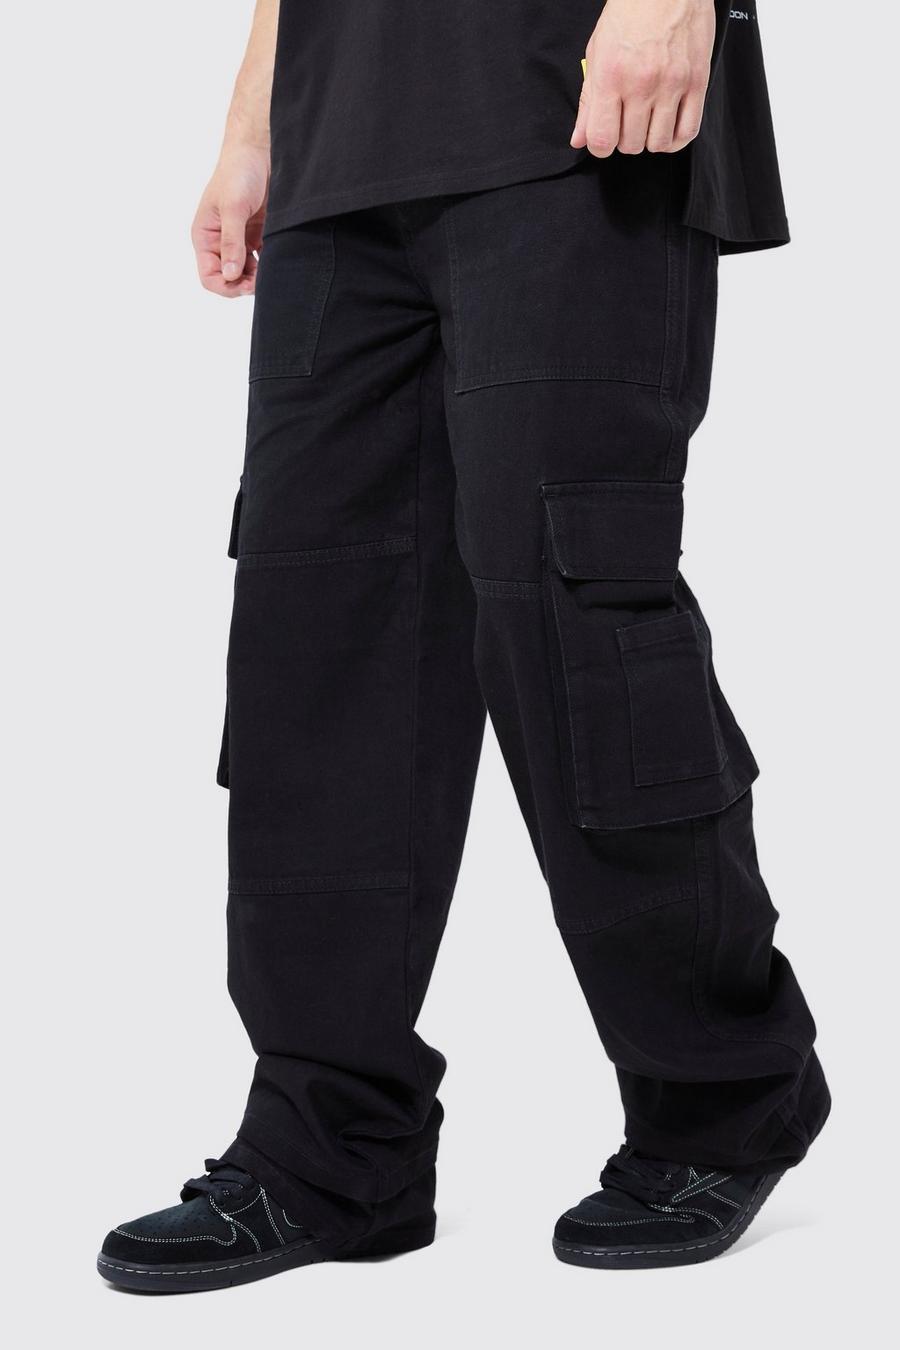 Black Tall Baggy Fit Cargo Jeans